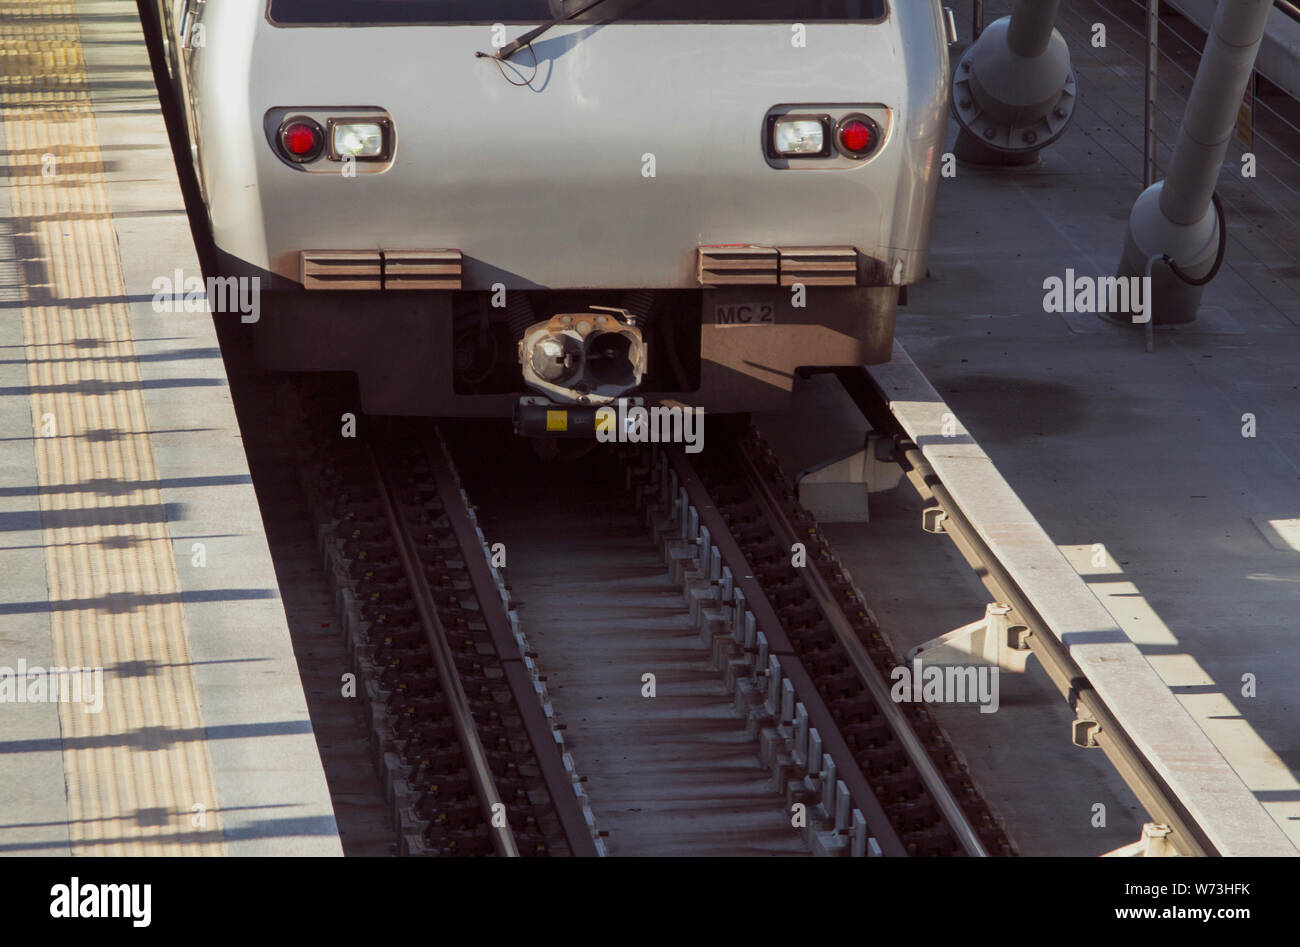 Section of a metro train seen from front next to an empty passenger platform on a suspension bridge in daylight. Stock Photo